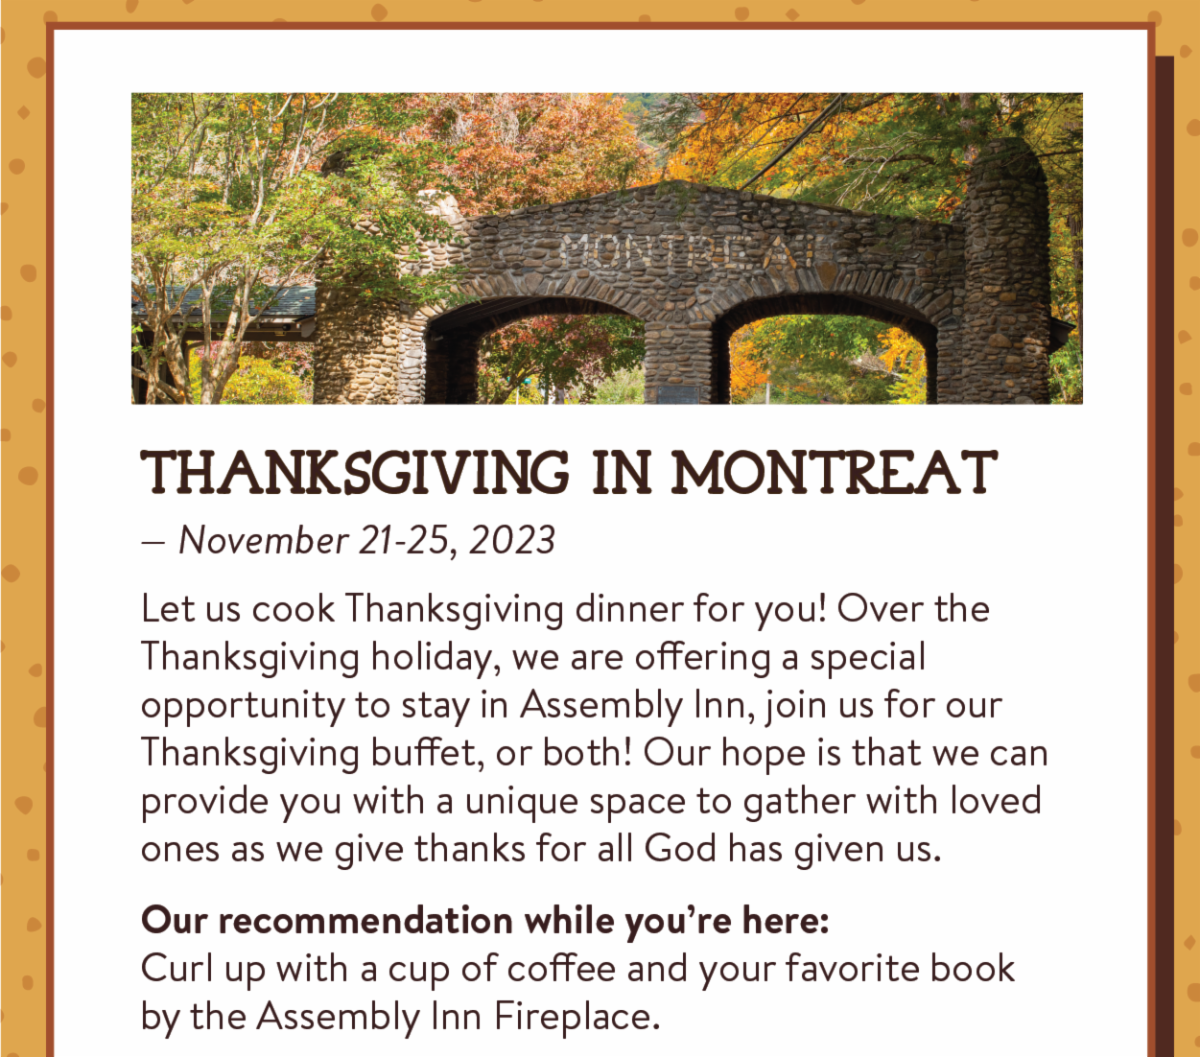 Thanksgiving in Montreat - Let us cook Thanksgiving dinner for you! Over the Thanksgiving holiday, we are offering a special opportunity to stay in Assembly Inn, join us for our Thanksgiving buffet, or both! Our hope is that we can provide you with a unique space to gather with loved ones as we give thanks for all God has given us. Our recommendation while you’re here:Curl up with a cup of coffee and your favorite book by the Assembly Inn Fireplace.